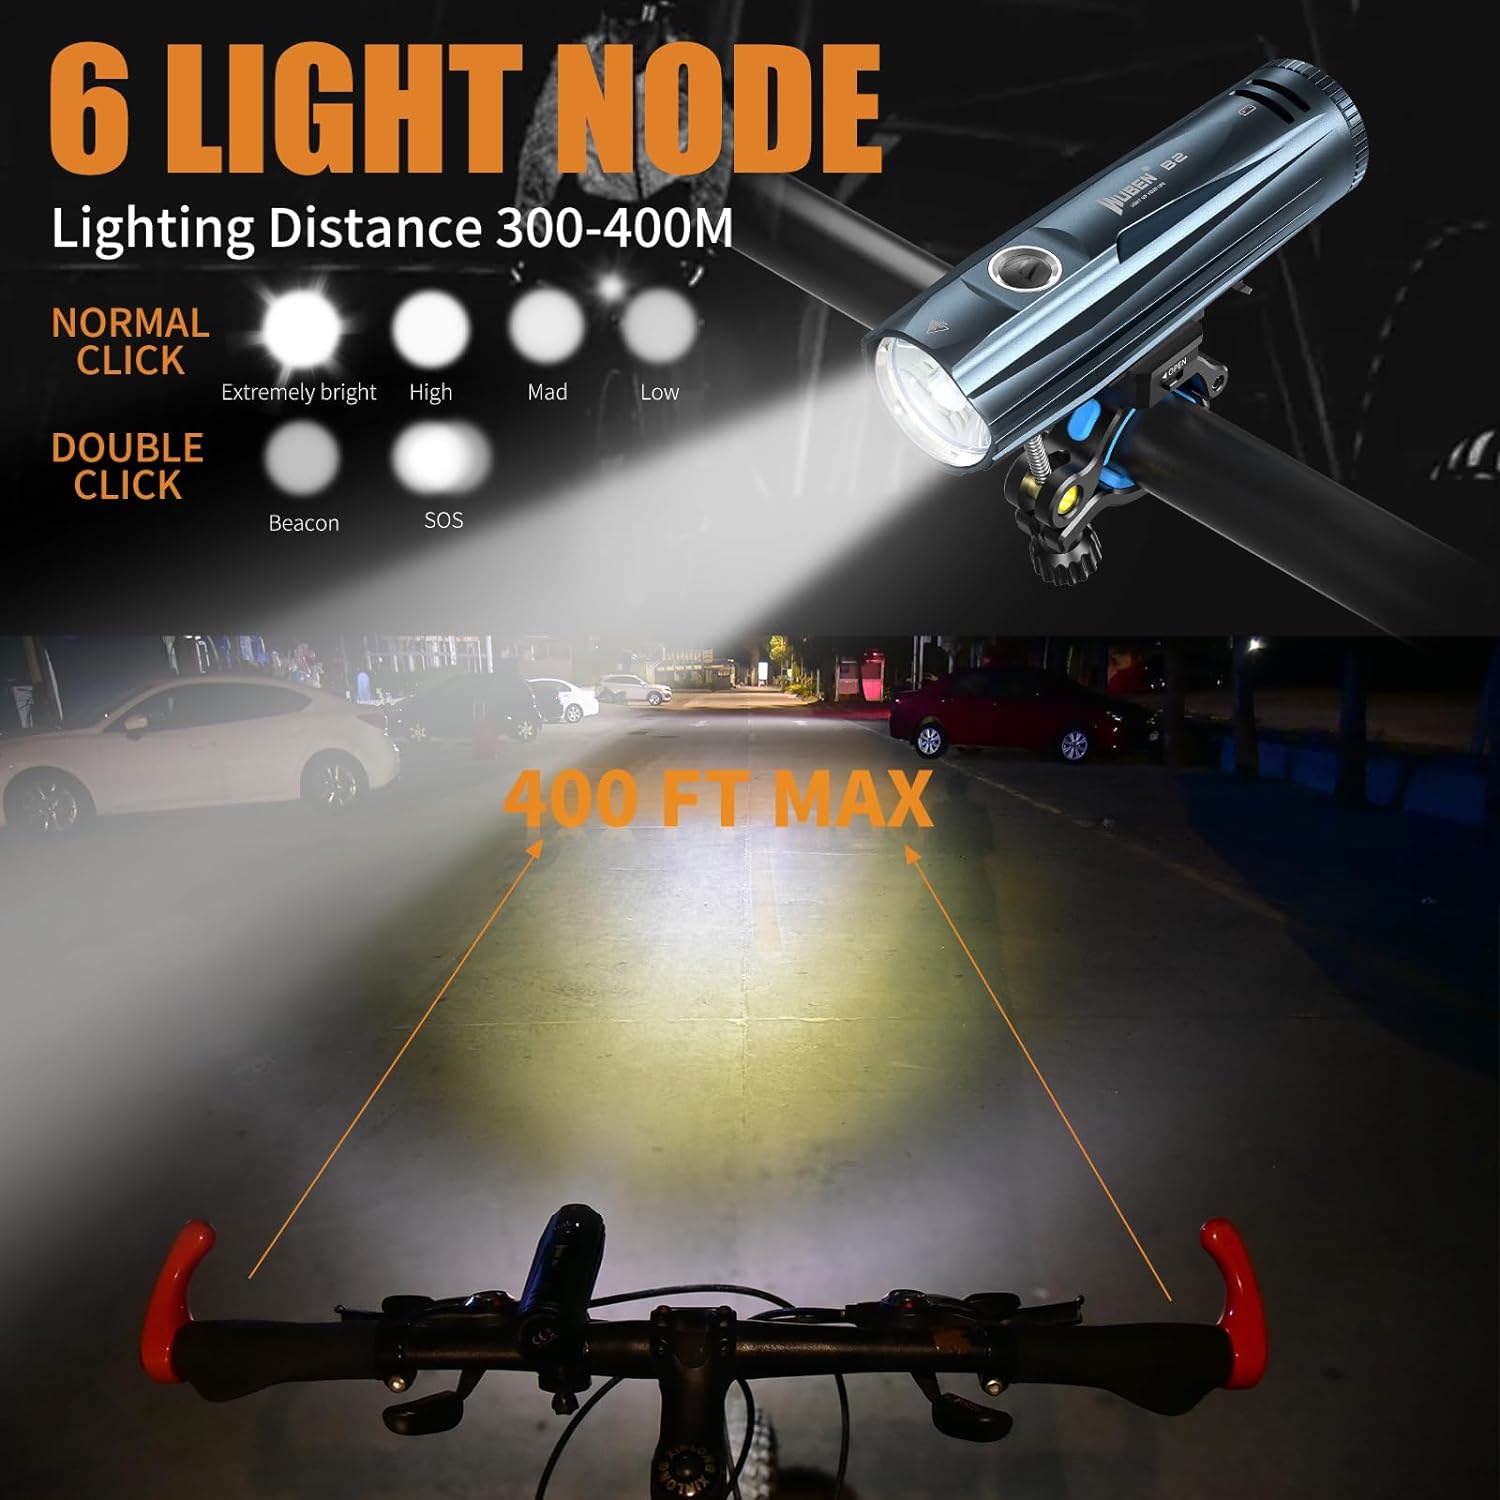 WUBEN B2 Flashlight Rechargeable 1300 Lumen, LED Bike Lights USB-C Rechargeable, Front and Back Flash Light 6 Modes, IP68 Waterproof Bike Headlight Taillight for Outdoor, Hiking, Emergency (Blue)